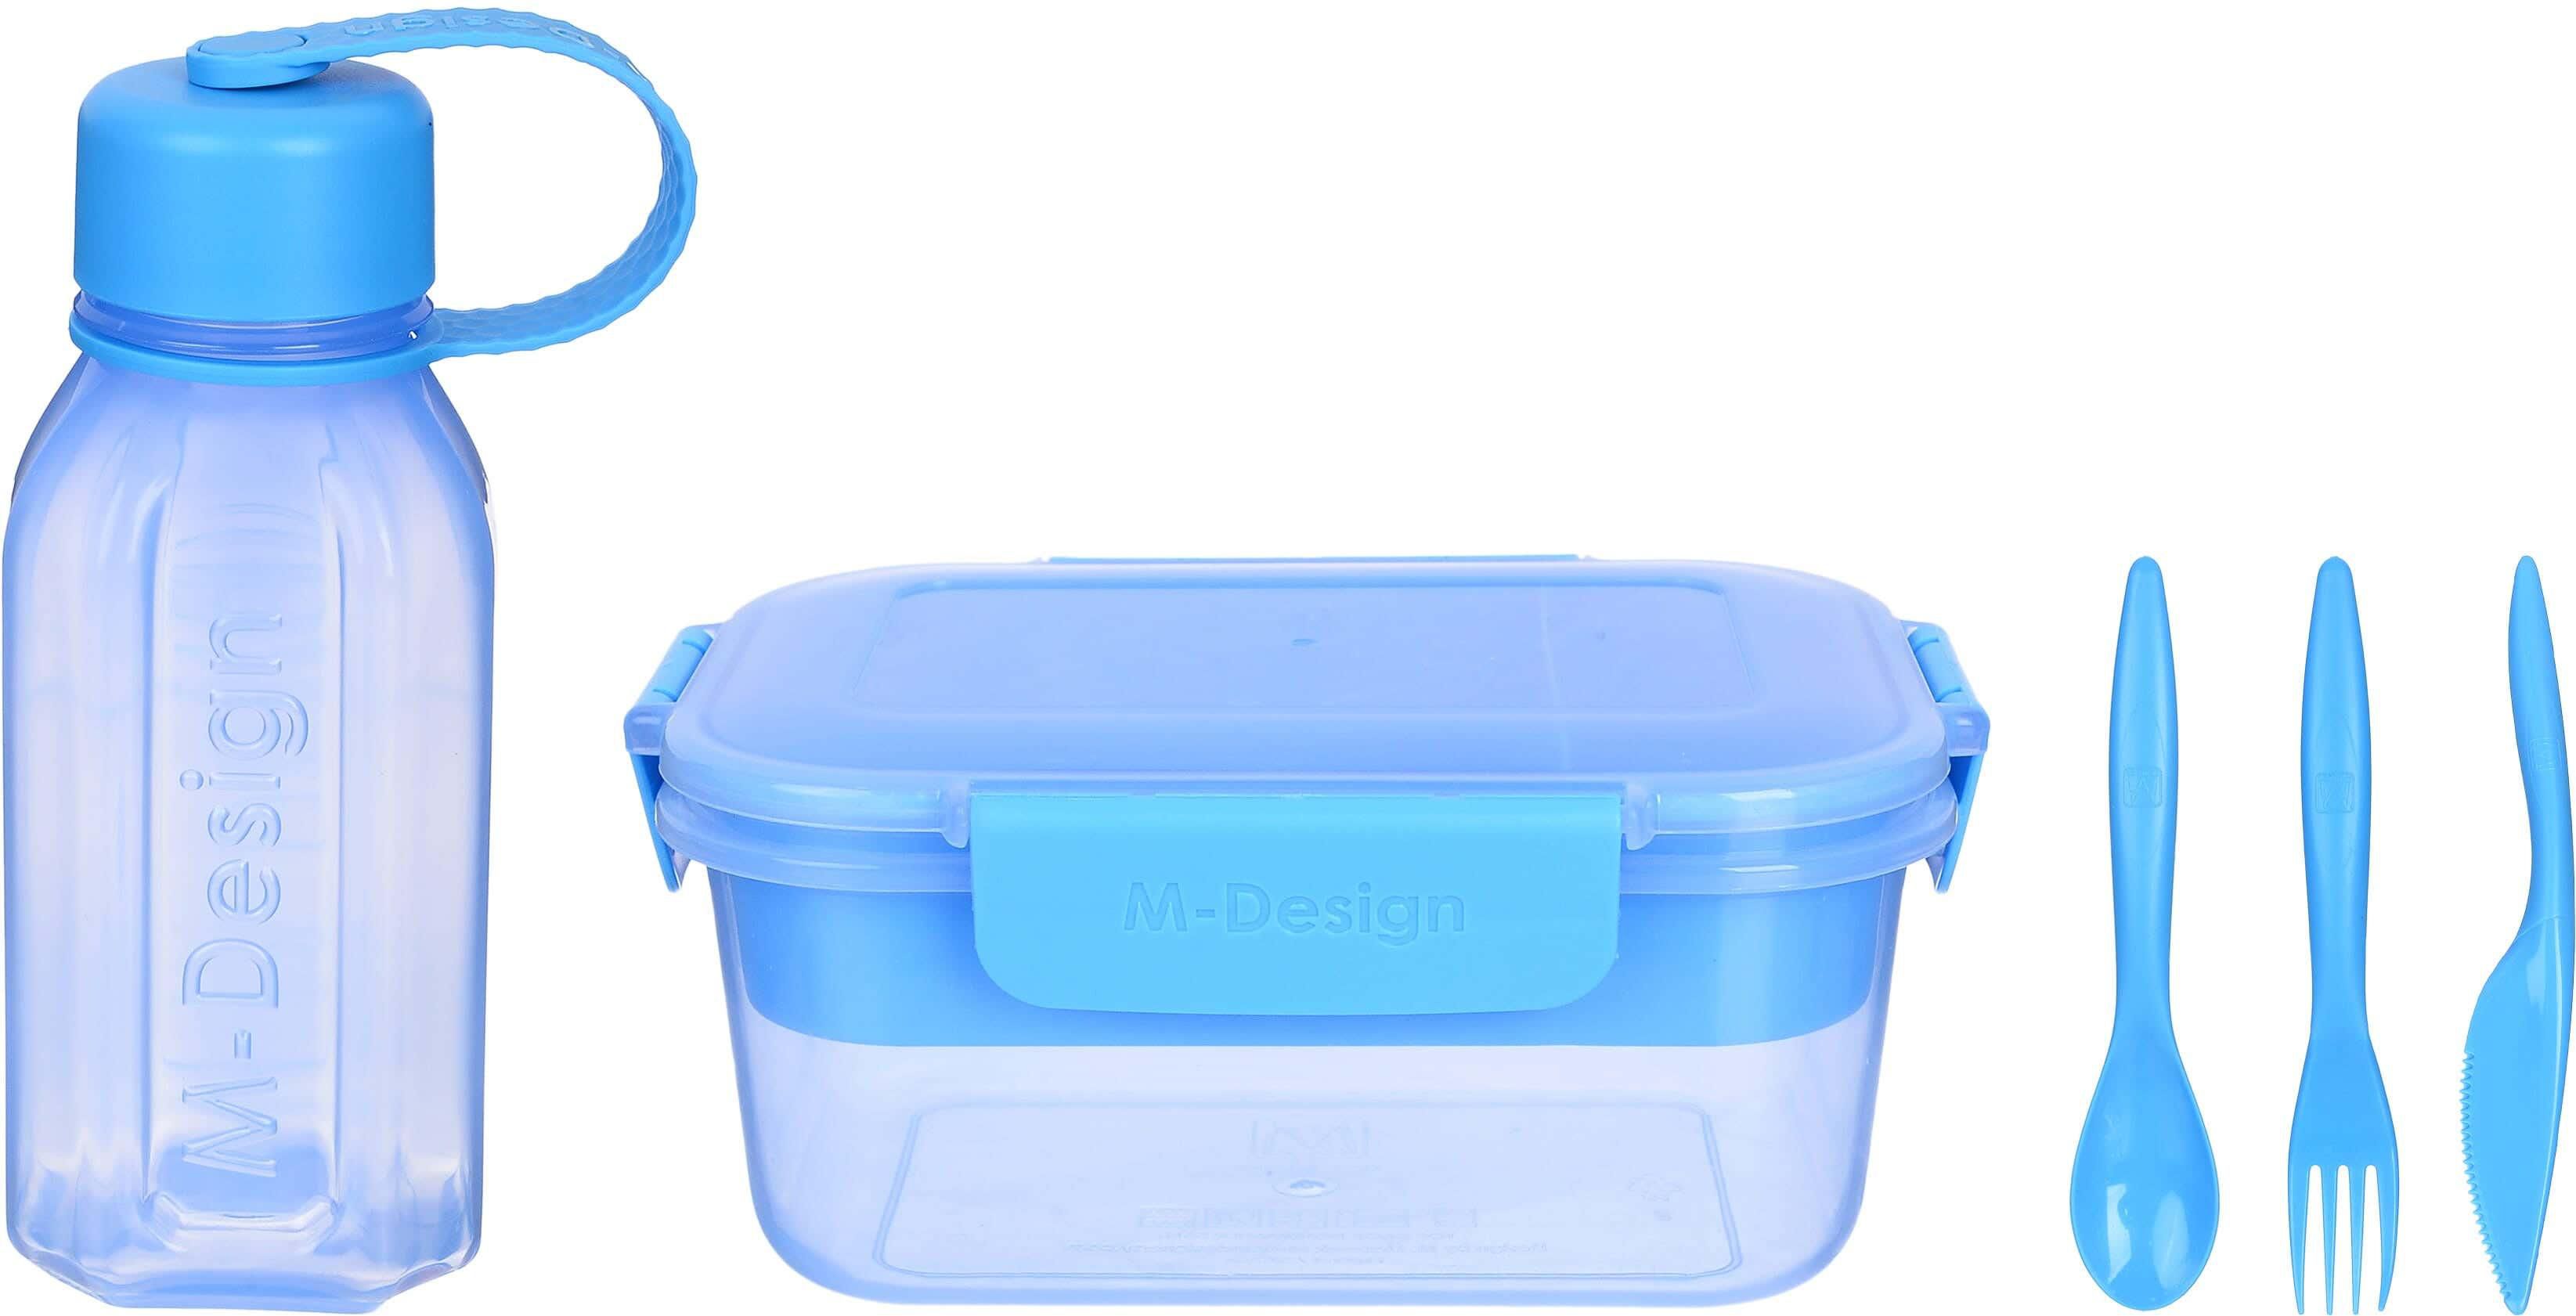 Get M Design Plastic Lunch Box Set, 5 Pieces - Blue with best offers | Raneen.com